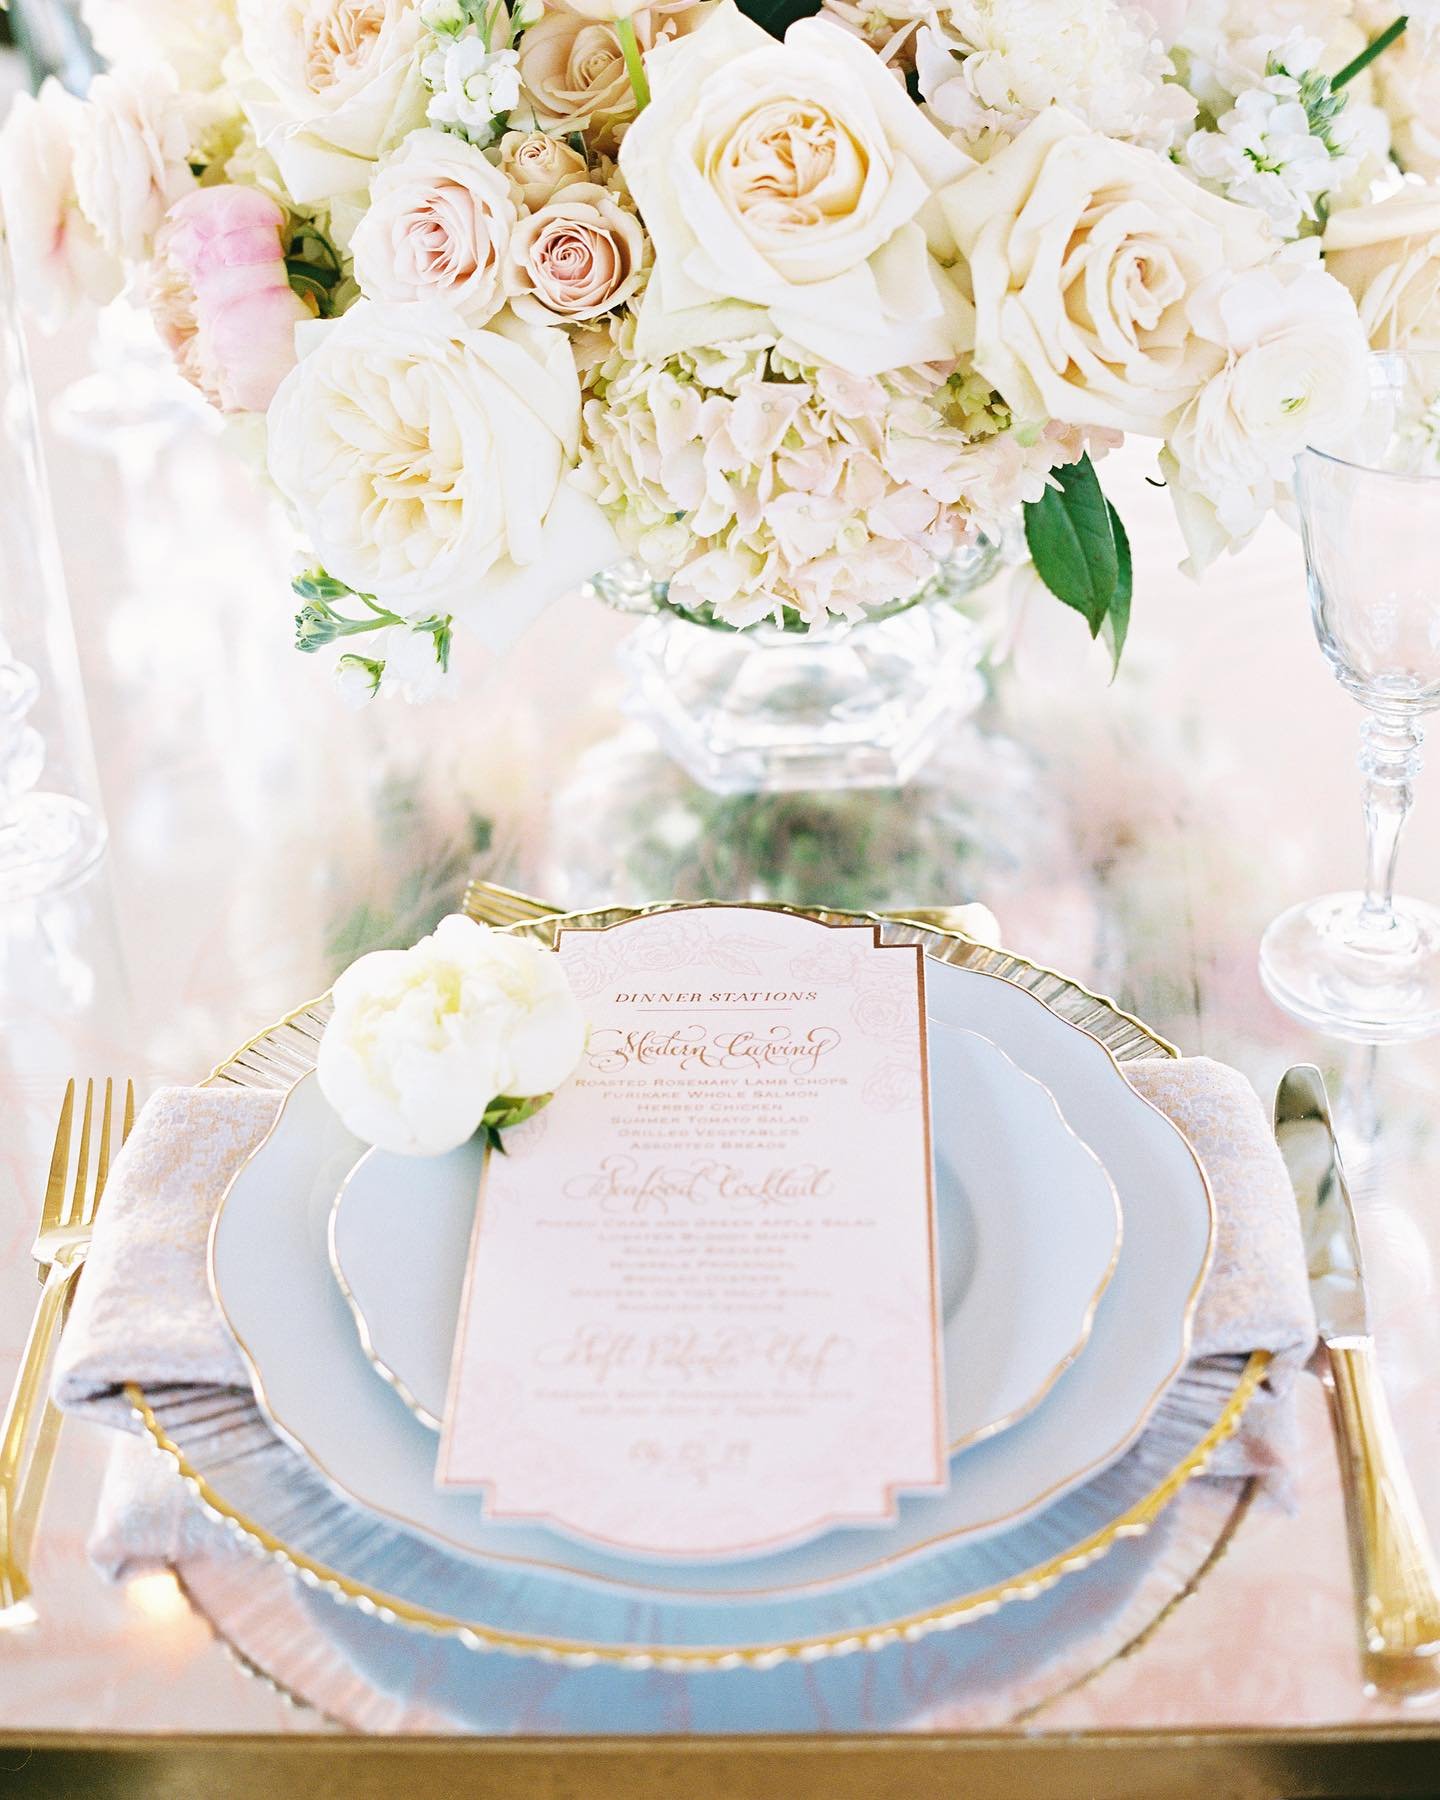 Wow! Talk about a beautiful table setting with a custom rose gold and blush letterpress menu ✨ Swipe to see the full shot of this gorgeous reception dinner designed by the talented @laurynprattes 

Amazing Vendors:
Planning &amp; Design: Lauryn Pratt